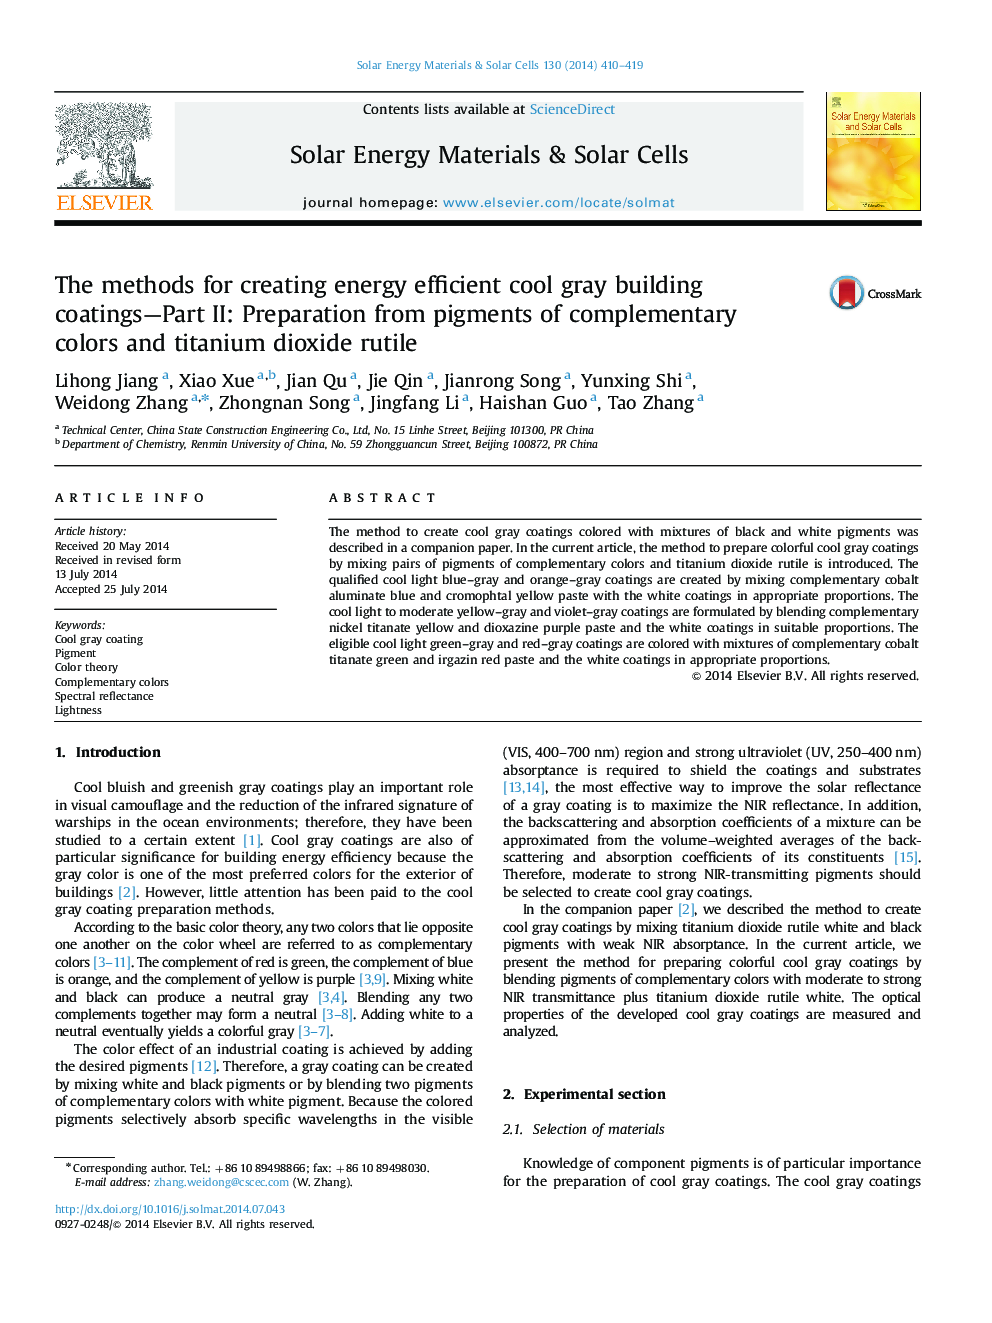 The methods for creating energy efficient cool gray building coatings-Part II: Preparation from pigments of complementary colors and titanium dioxide rutile